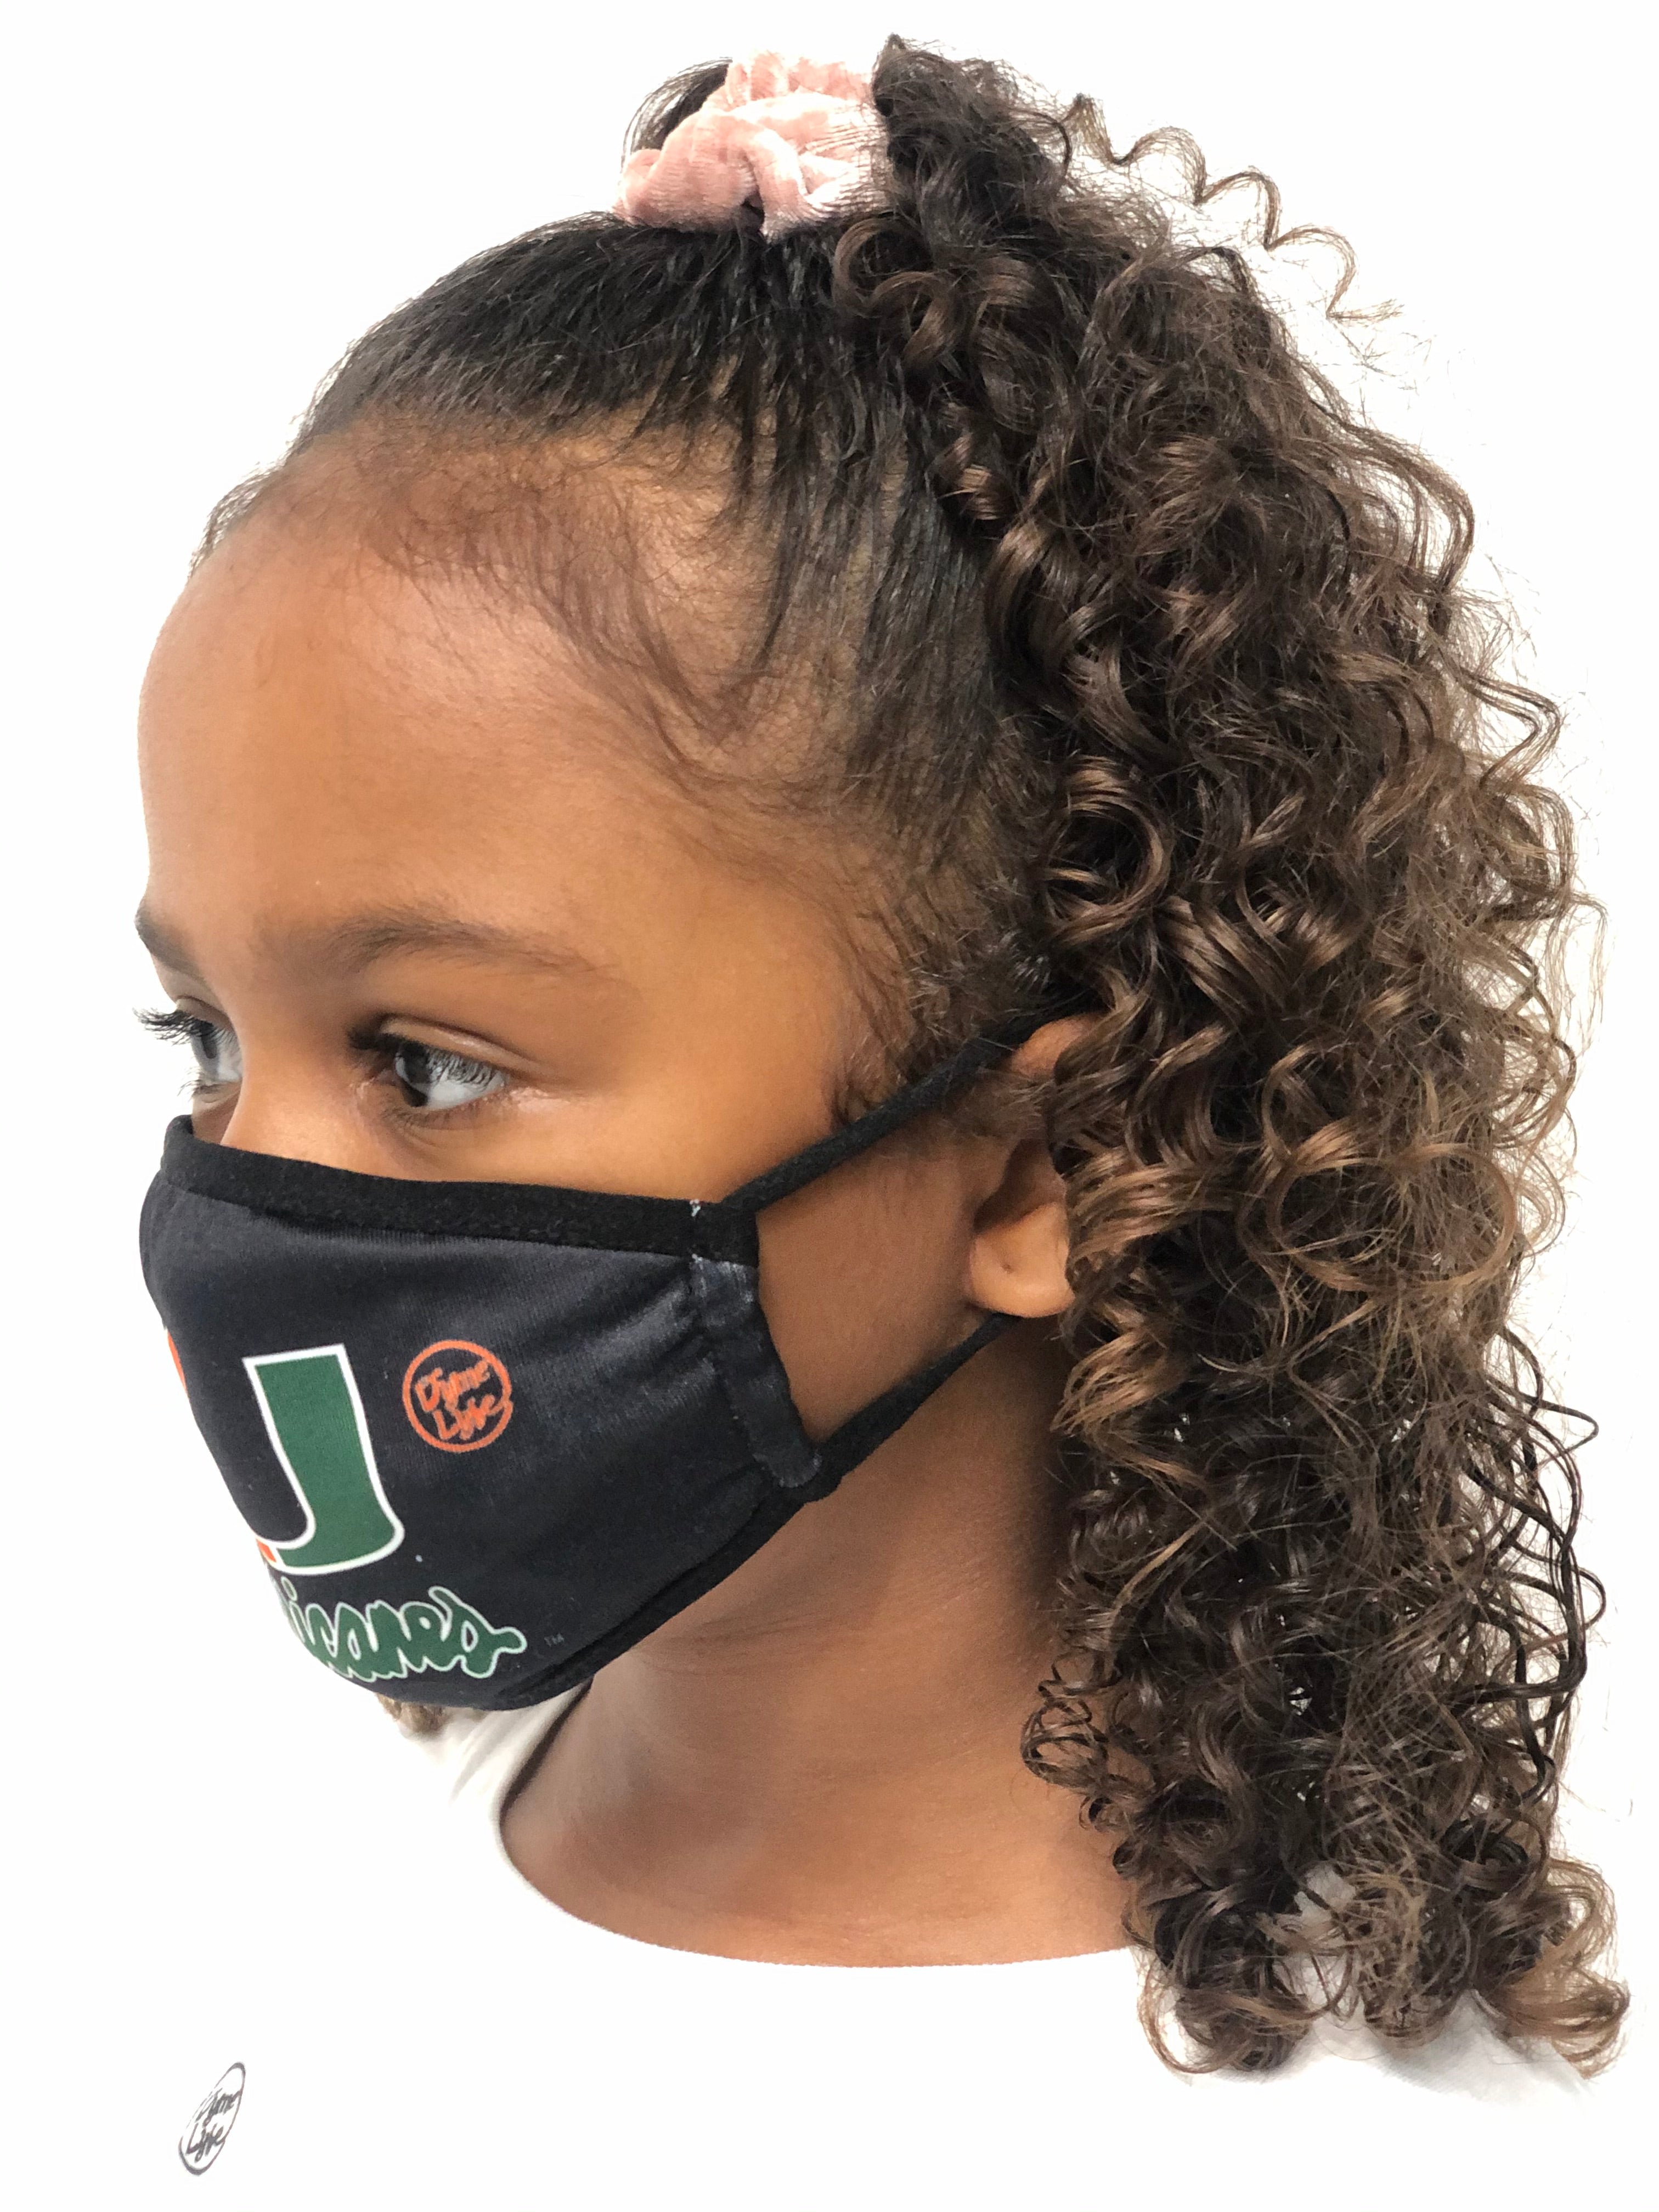 Kids 3 Pack Miami Face Covering